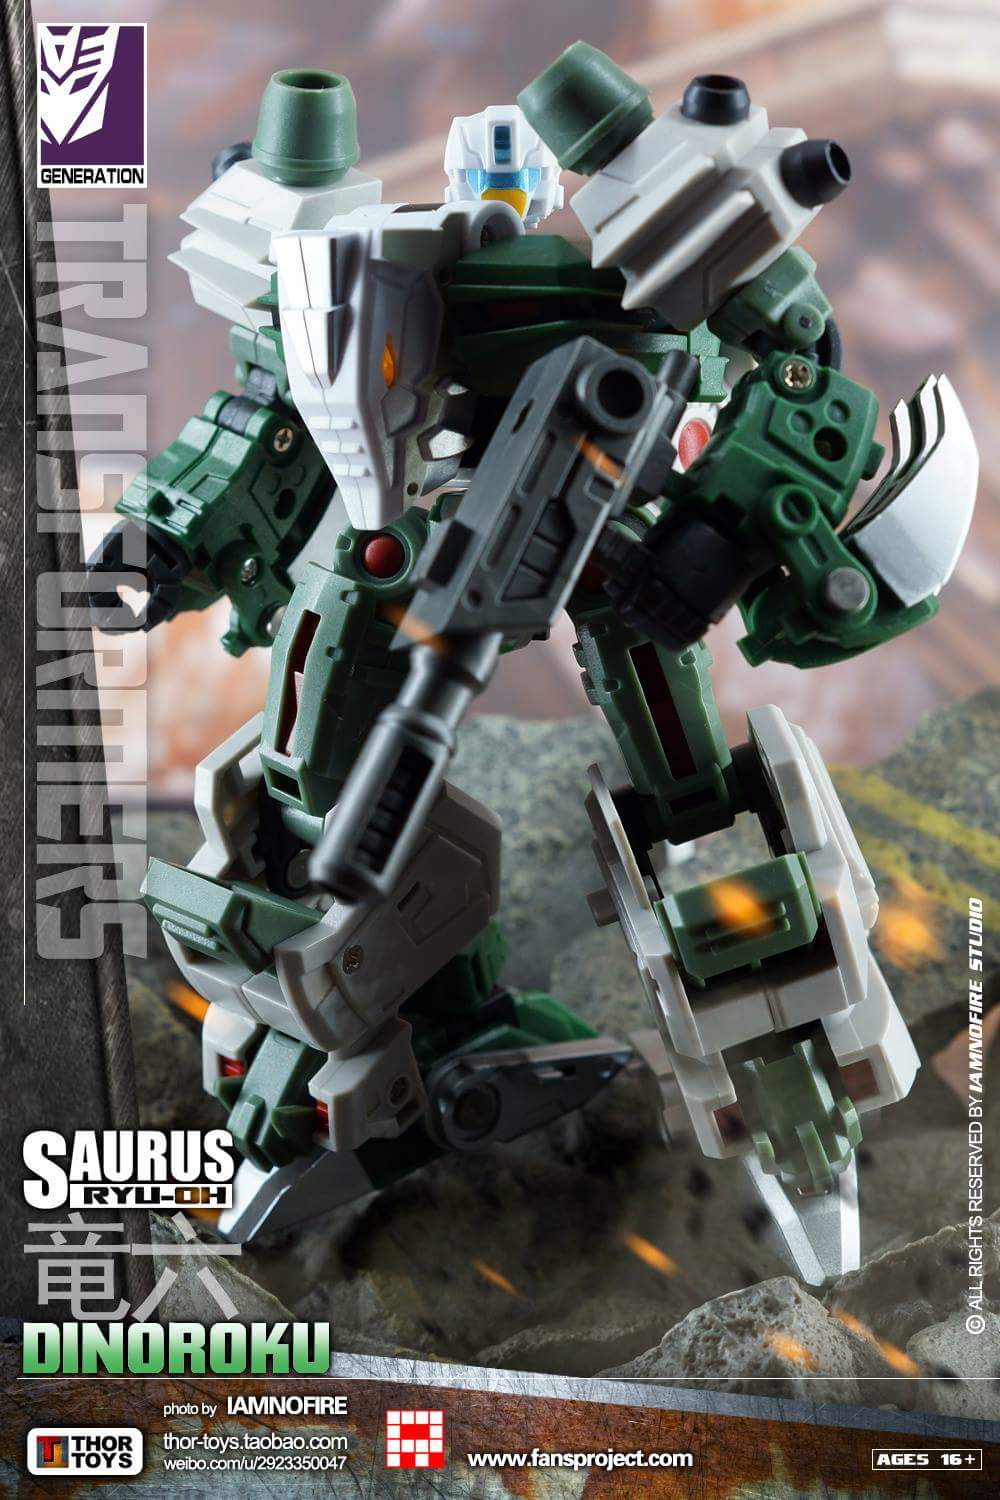 [FansProject] Produit Tiers - Ryu-Oh aka Dinoking (Victory) | Beastructor aka Monstructor (USA) - Page 2 1idqmoph